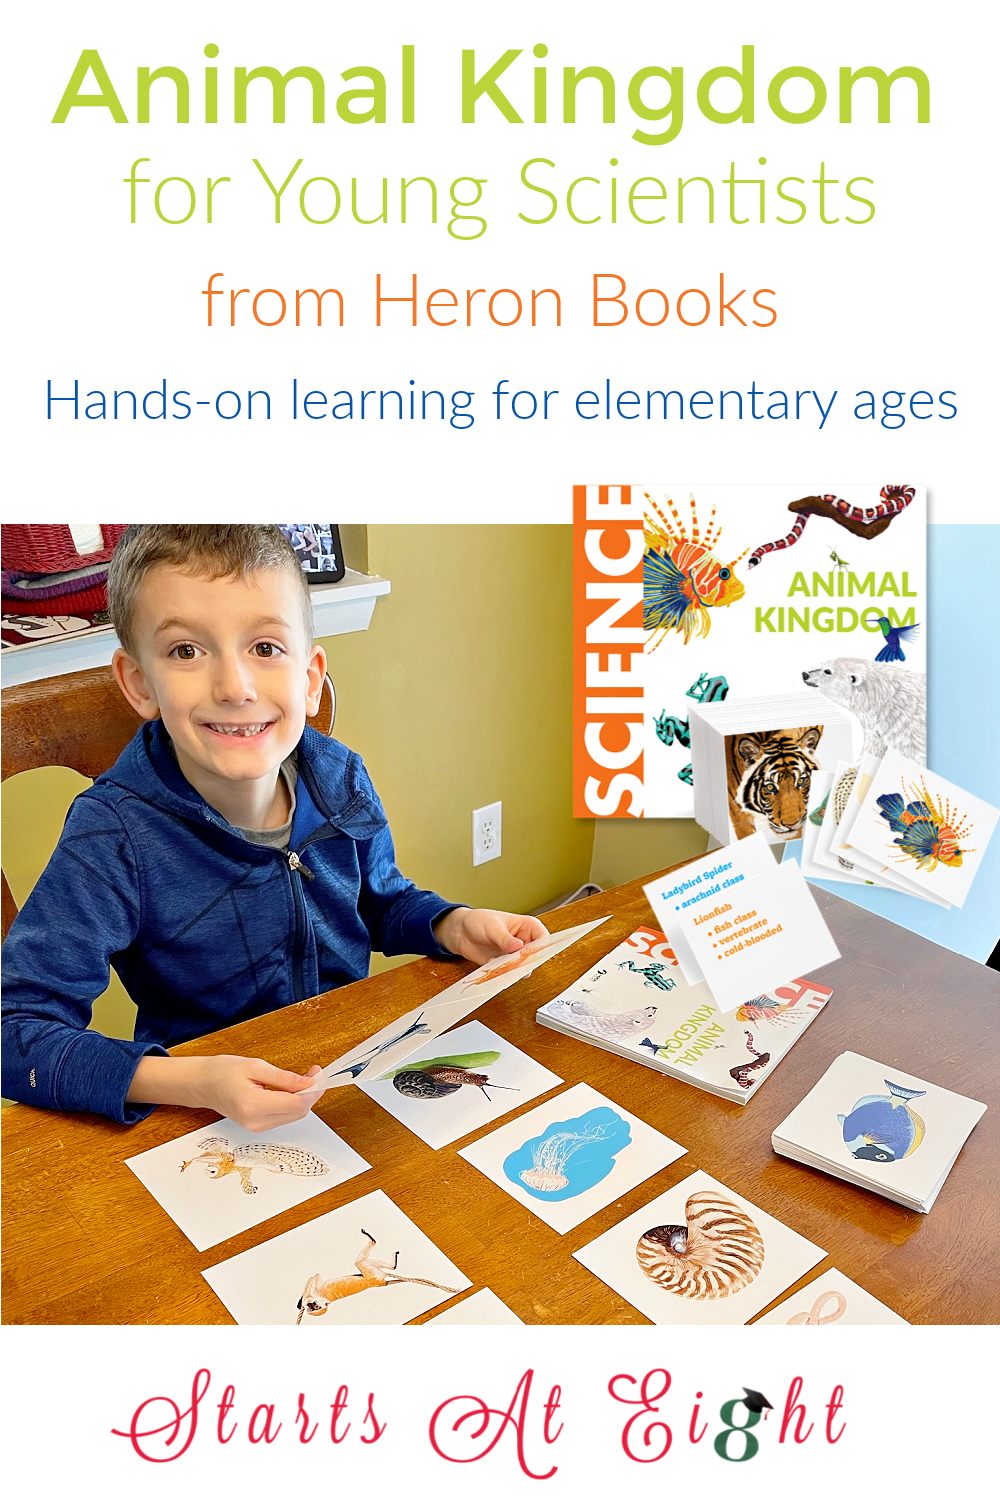 Animal Kingdom for Young Scientists - A Heron Books Review - StartsAtEight